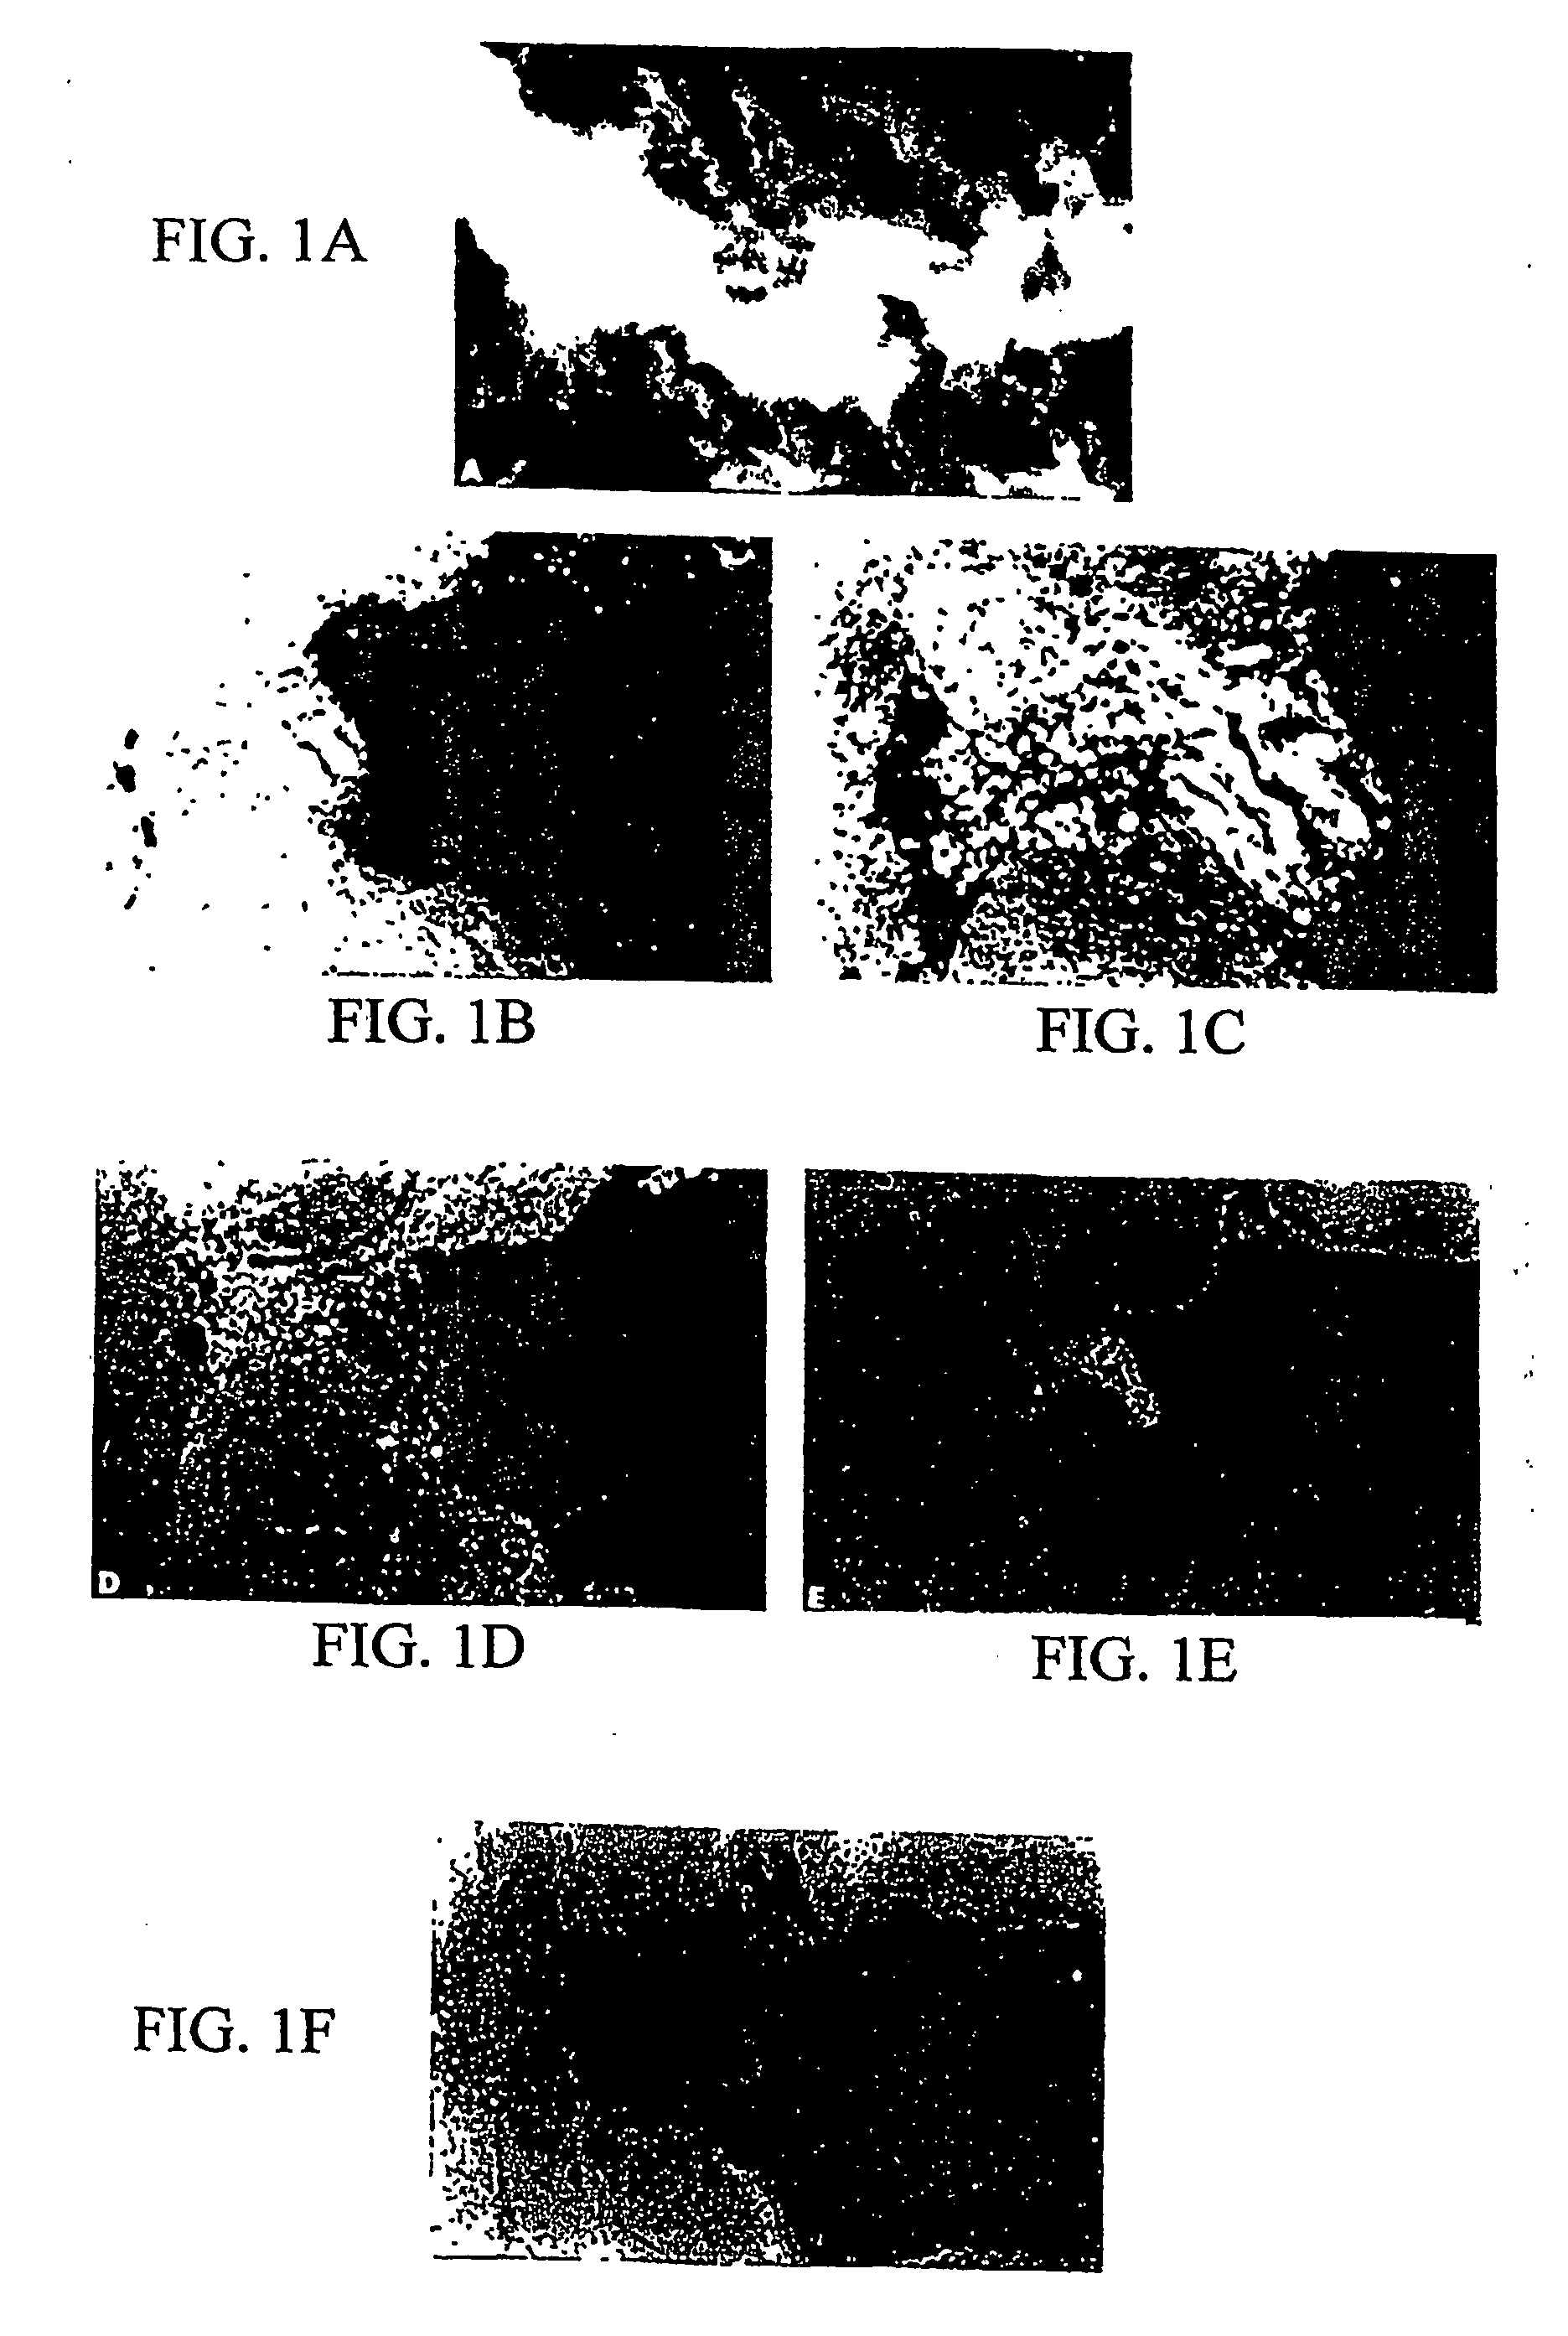 Methods for binding agents to b-amyloid plaques